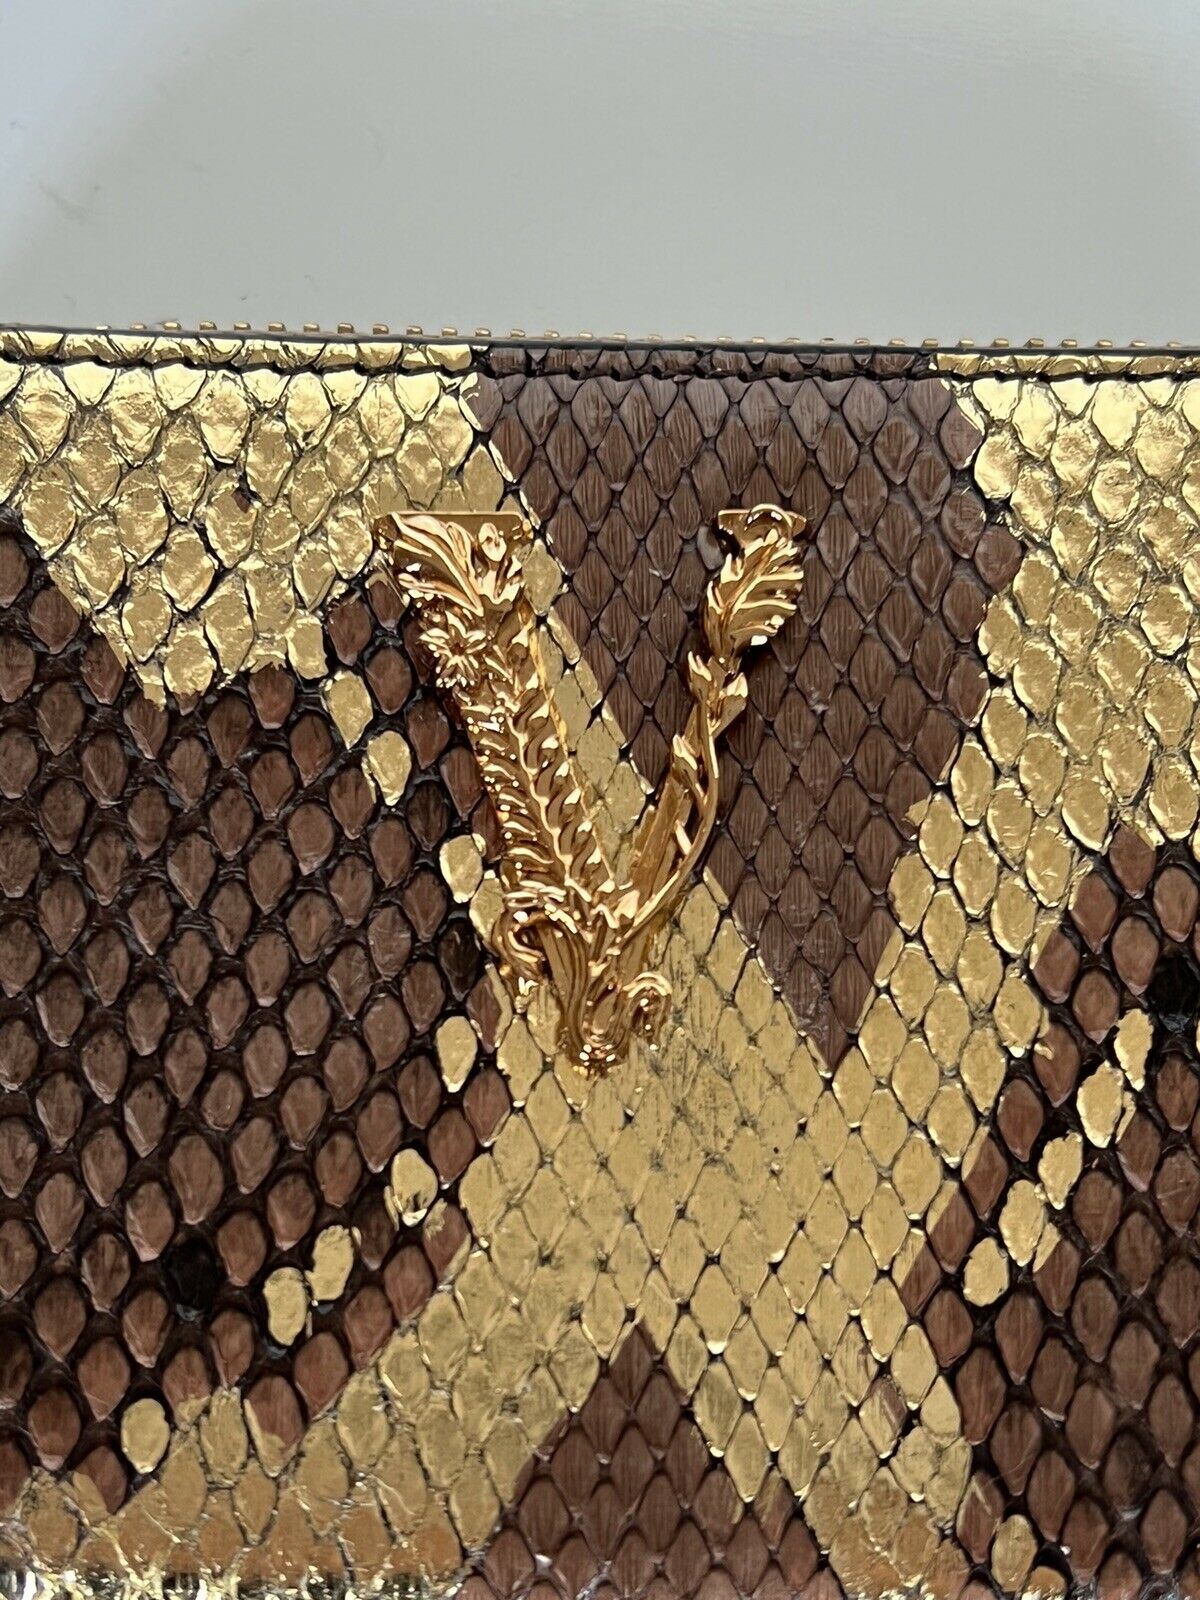 NWT $595 Versace Brown/Gold Snake Print Python Leather Small Zipper Wallet 682